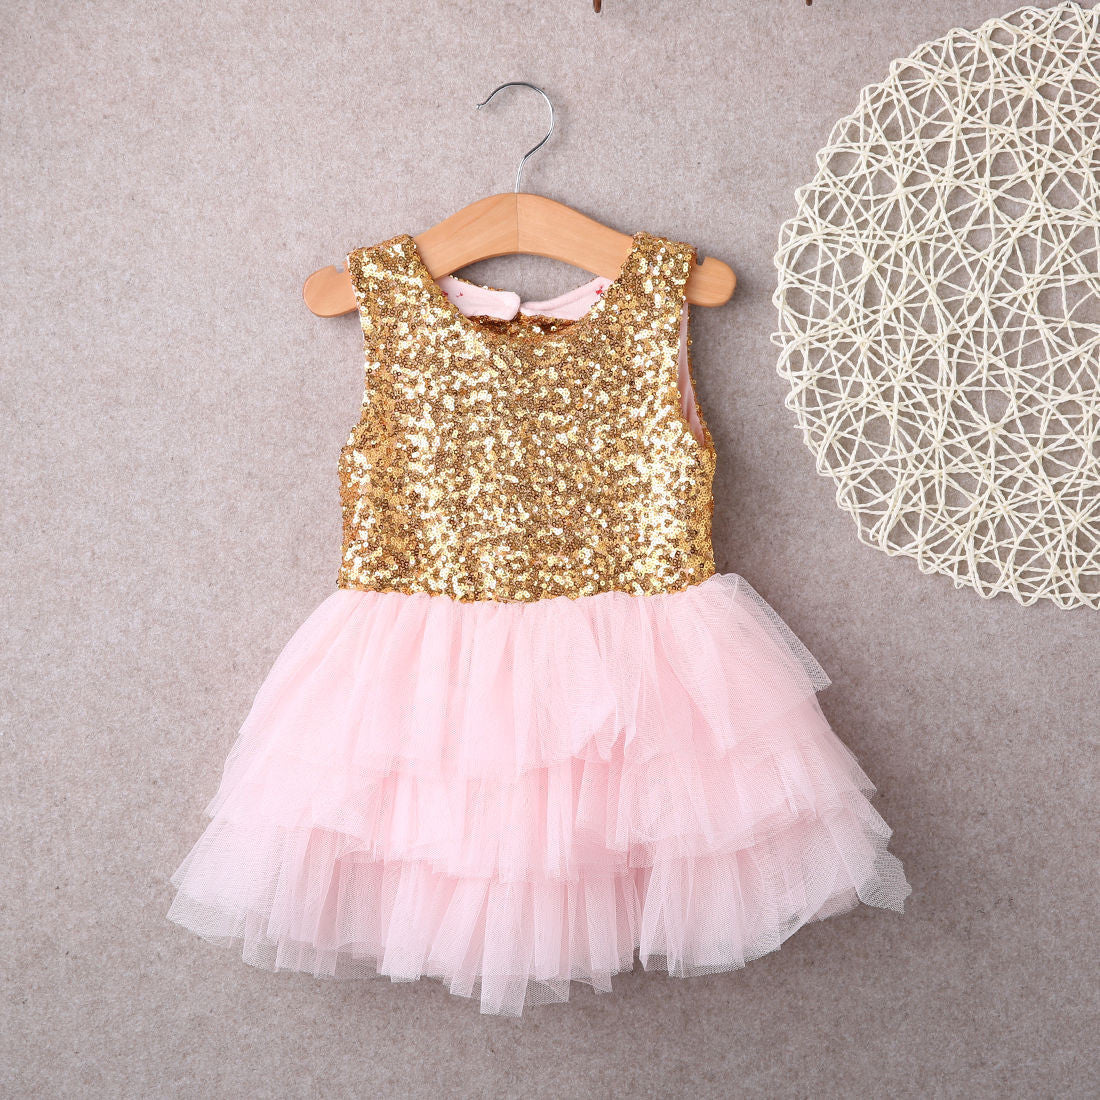 Dresses Baby Children Girl Sequins Backless Bow Gold Lace Tulle Ruffled Party Mini Ball Gown Formal Dress Fashion Girl-Dollar Bargains Online Shopping Australia